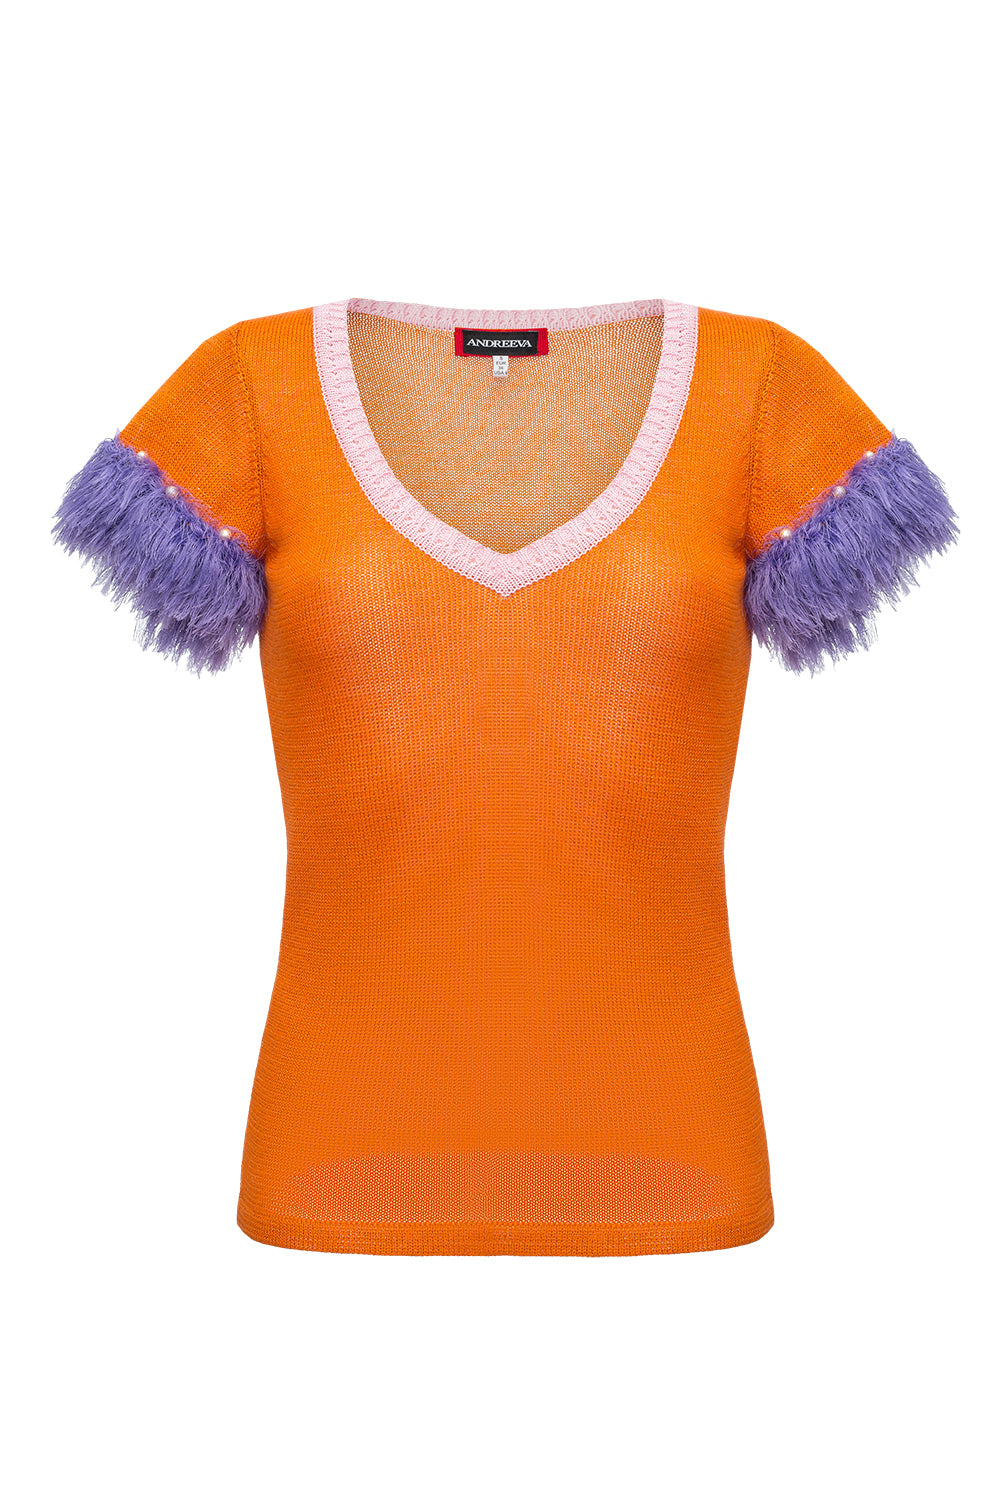 Women’s Yellow / Orange Golden Poppy Knit Top With Handmade Knit Details Extra Small Andreeva